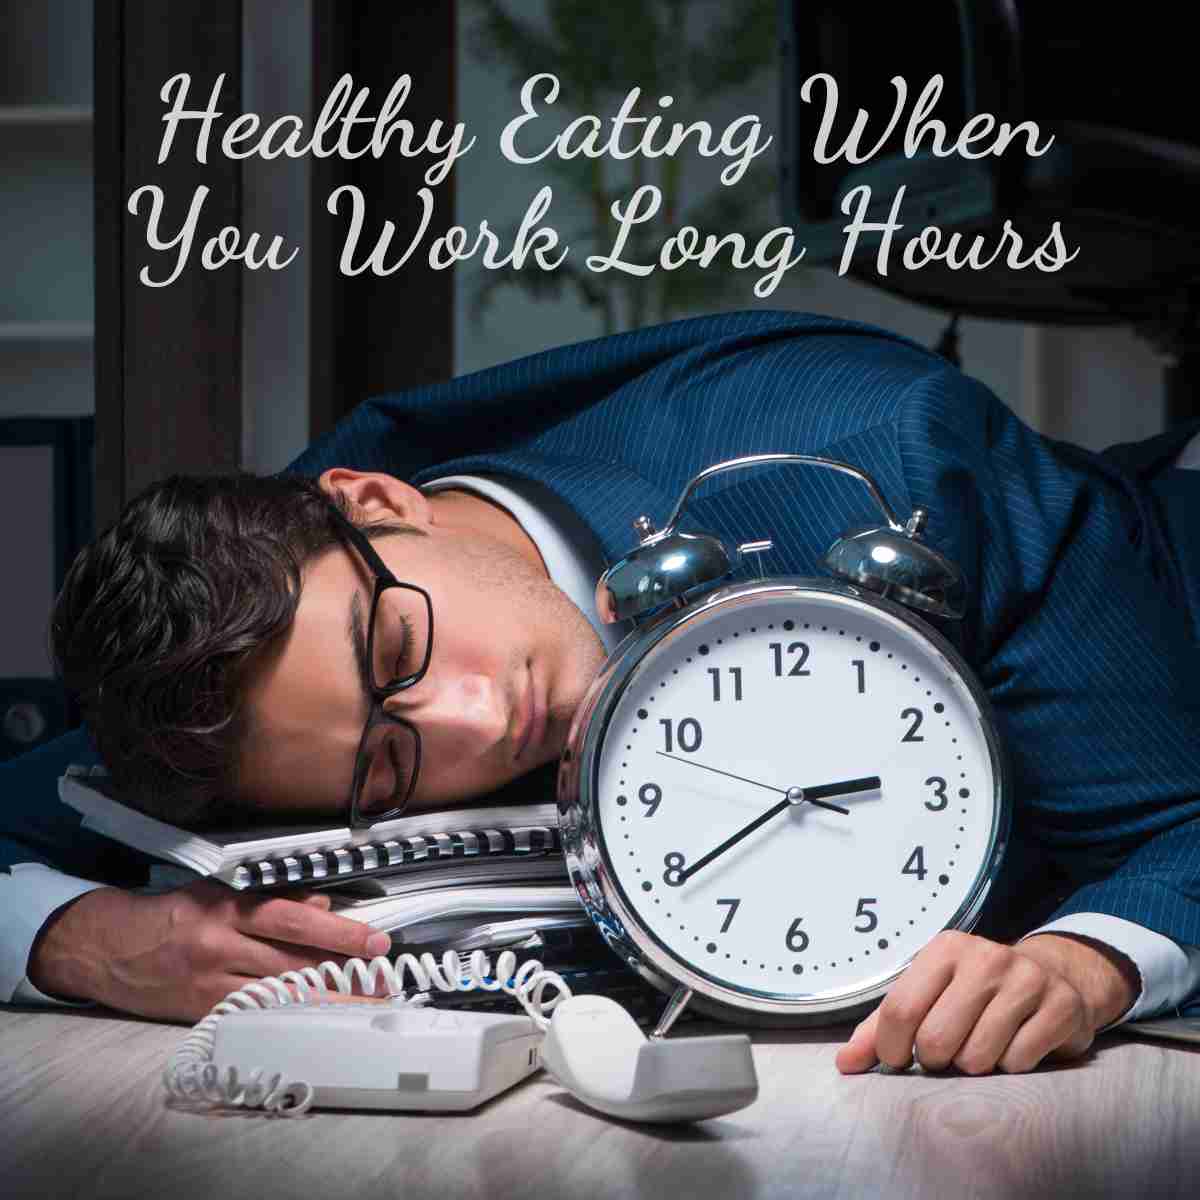 Healthy Eating When You Work Long Hours